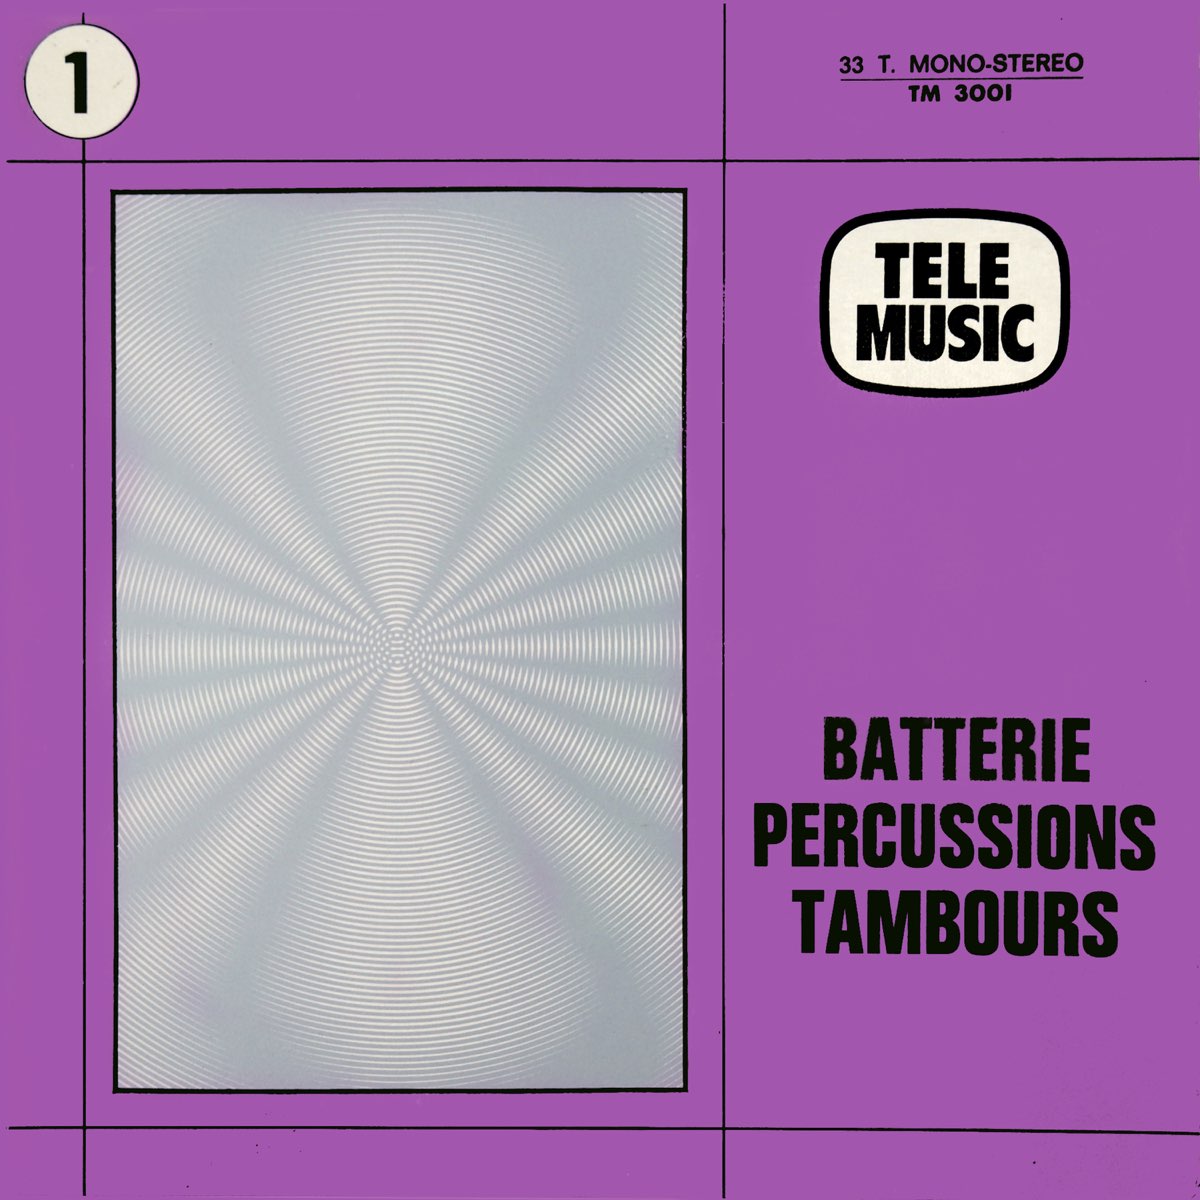 Batterie Percussions Tambours - Album by Tele Music - Apple Music